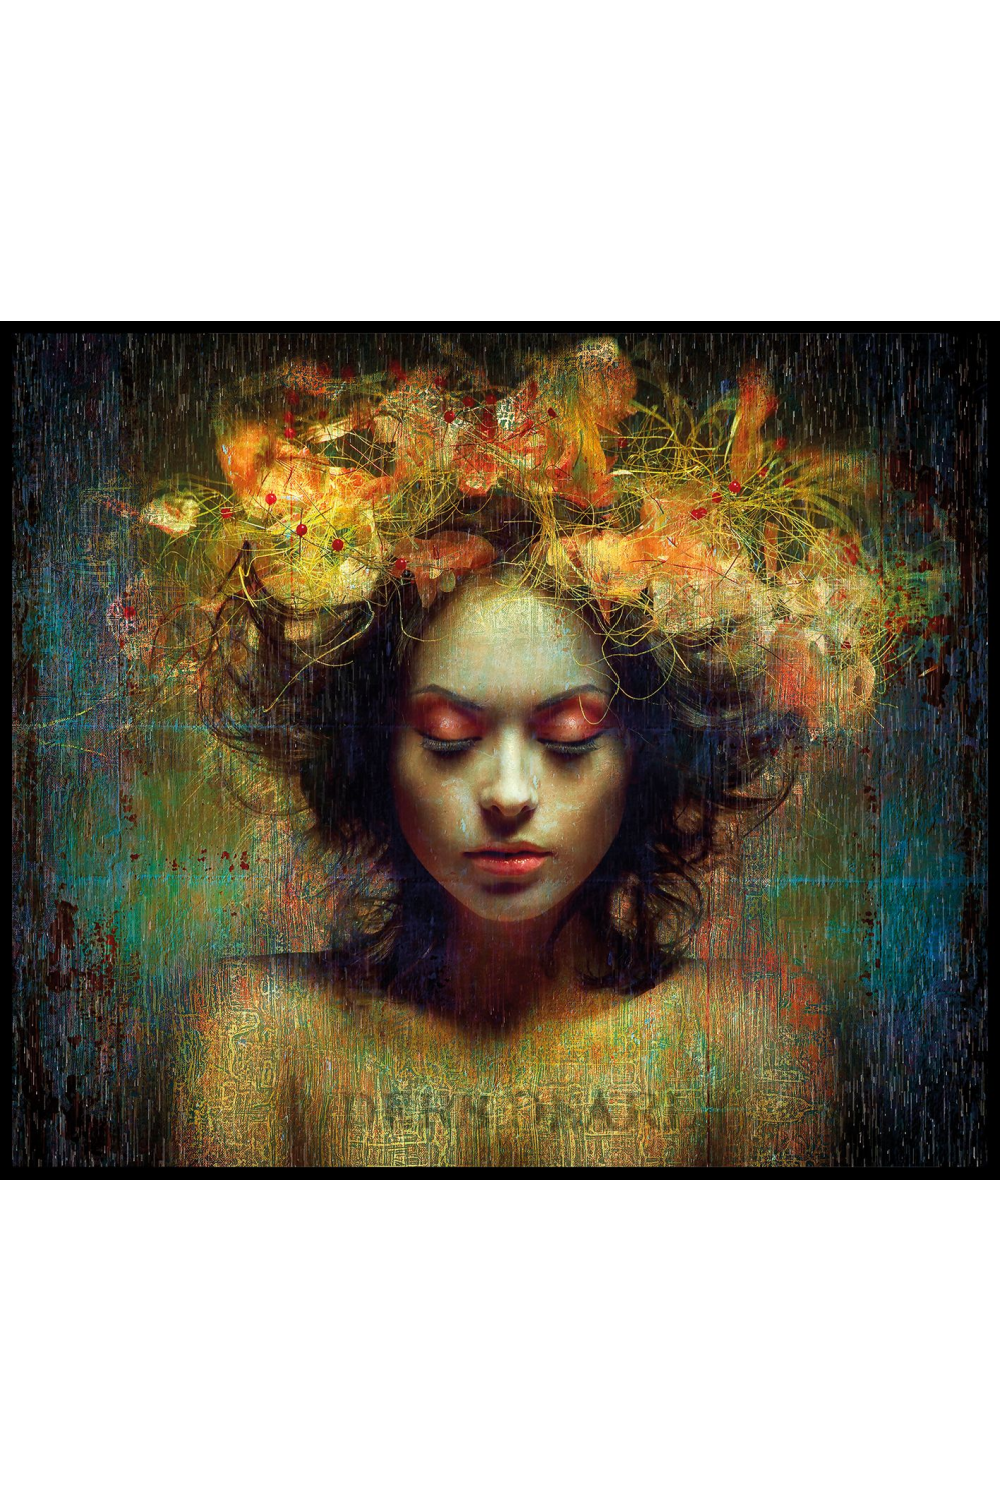 Woman With Floral Wreath Portrait | Andrew Martin Fuego | Oroa.com